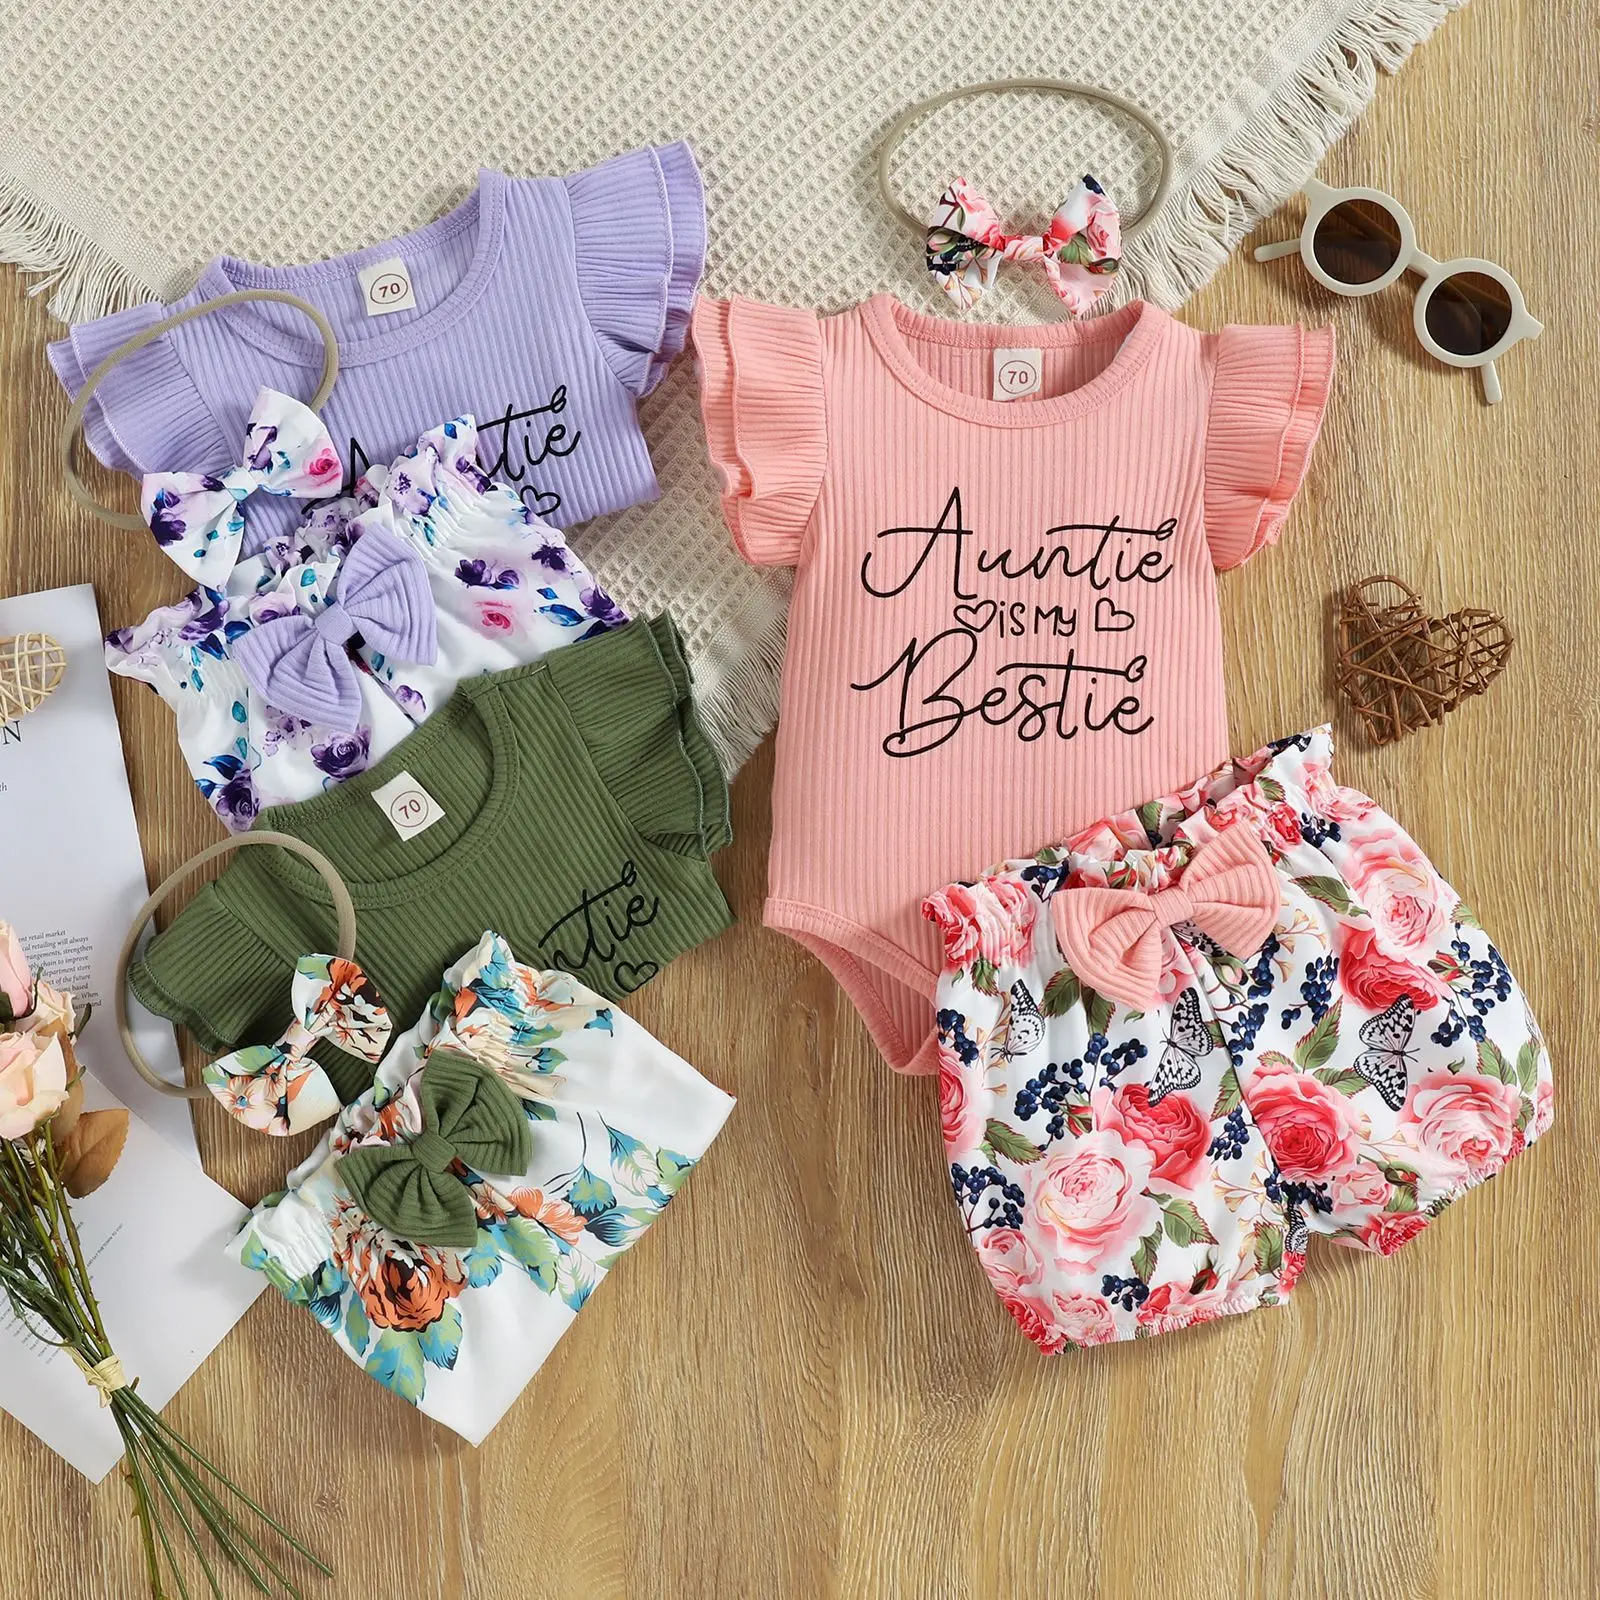 2023 New Baby Summer Clothing Newborn Baby Girl Letter Pit Striped Jumper+Floral Shorts+Headband 3Pcs Outfits Set Infant Toddler